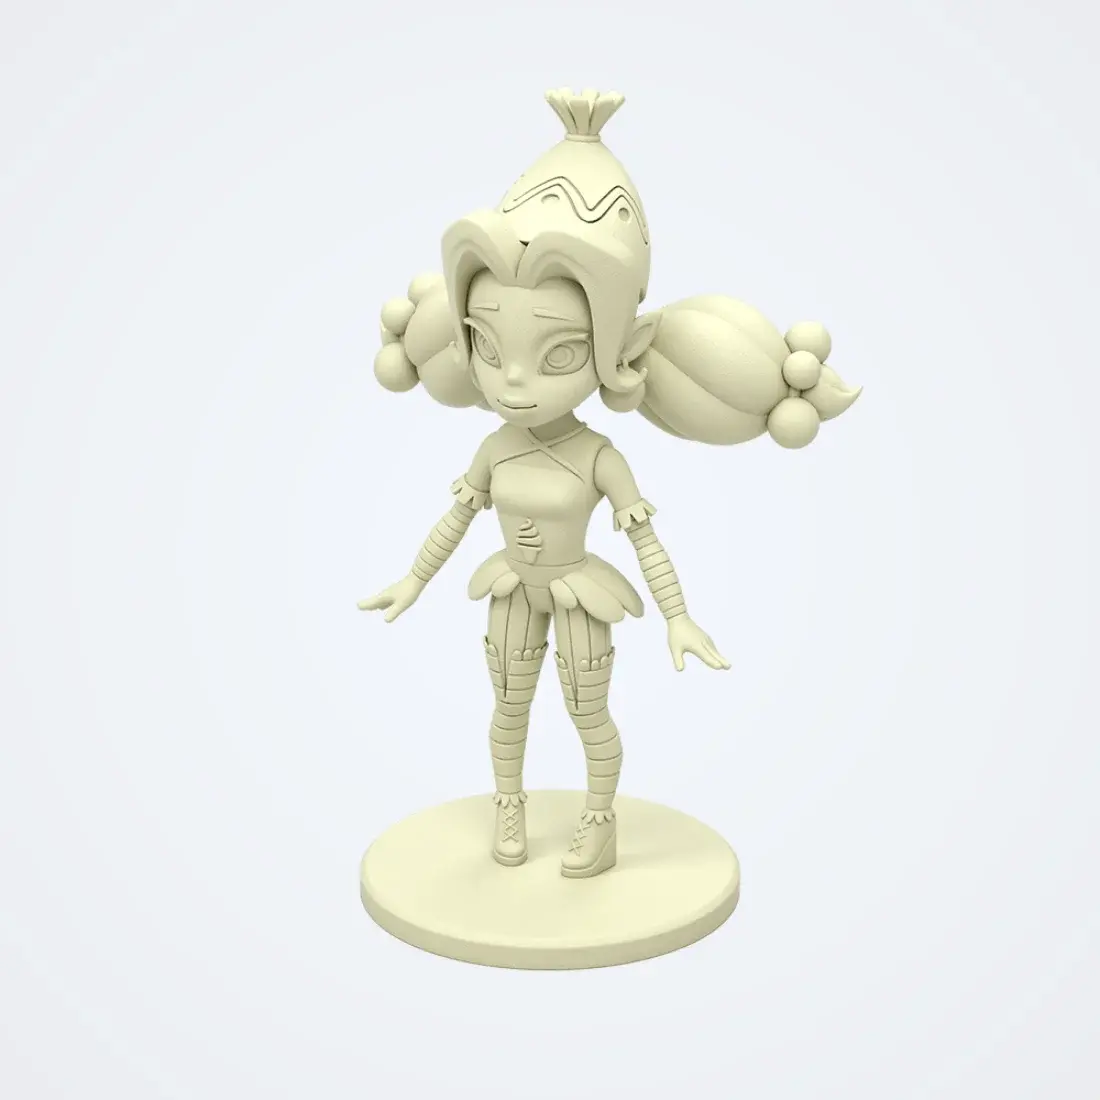 Toogle toy 3D character by devabit